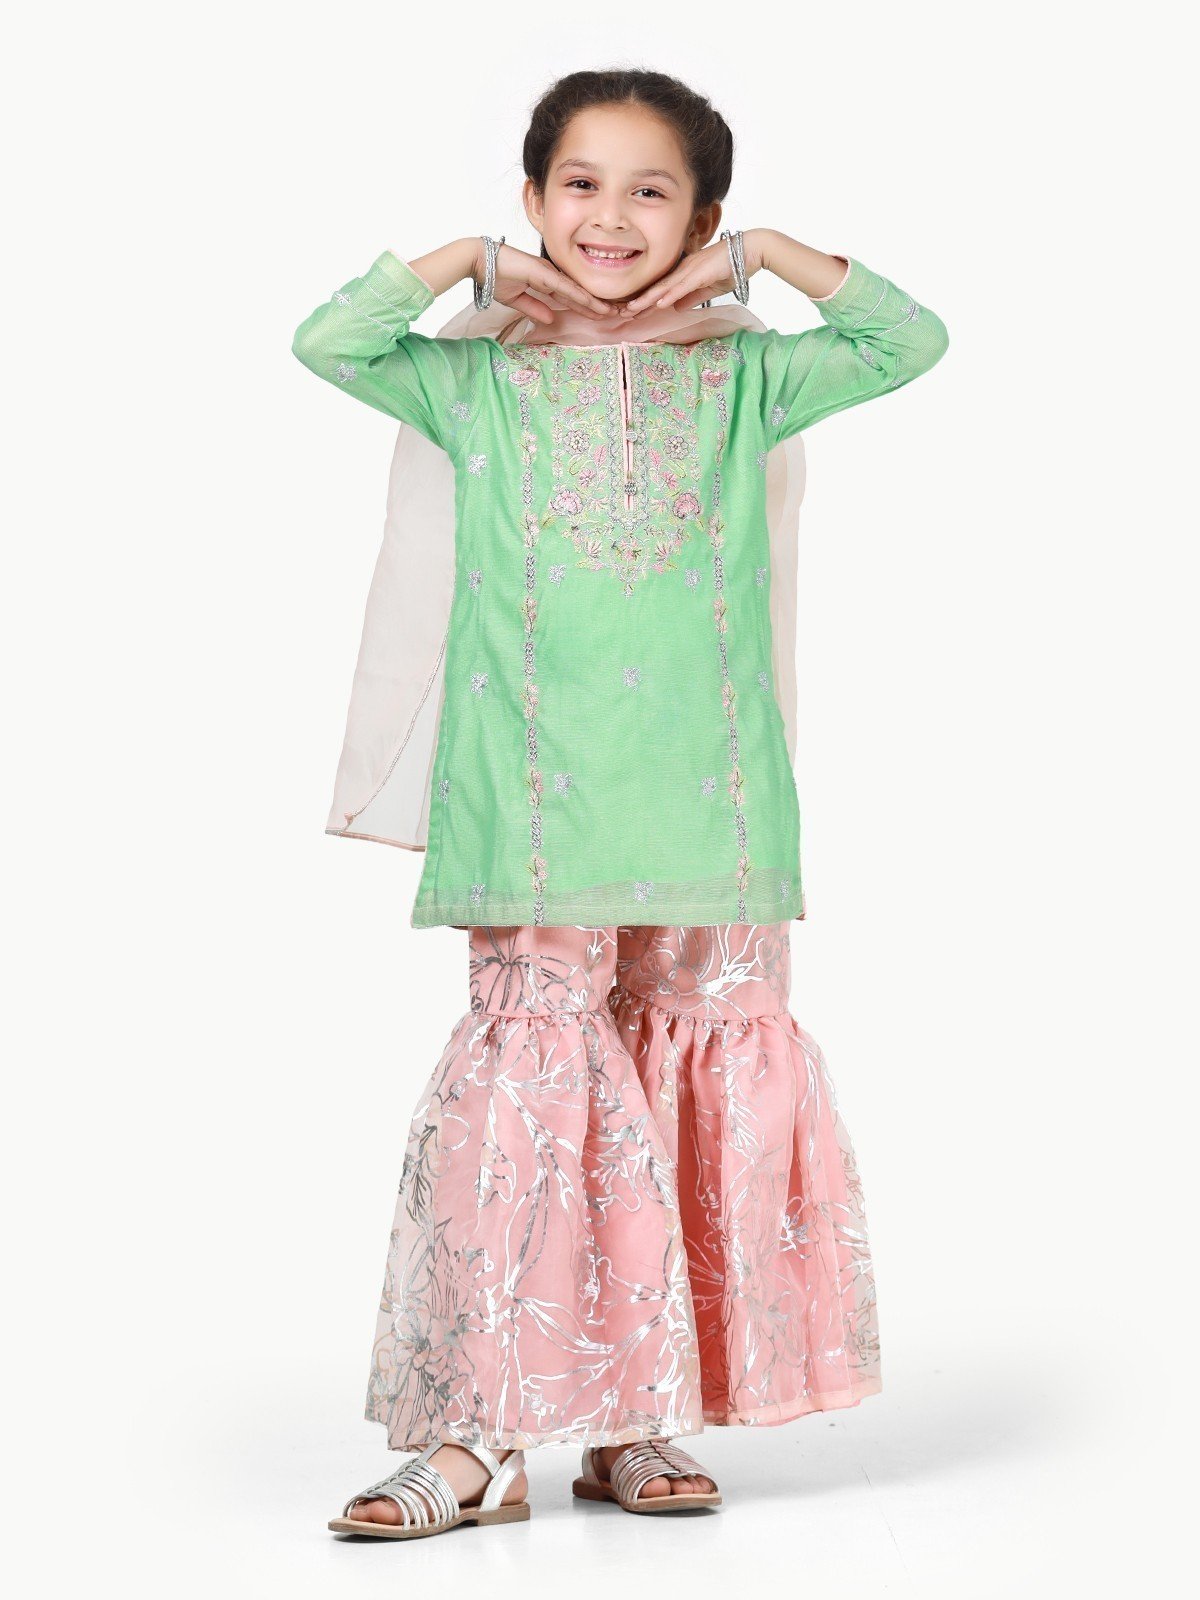 11 Latest Punjabi Outfit Trends for your Kids - Baby Couture India